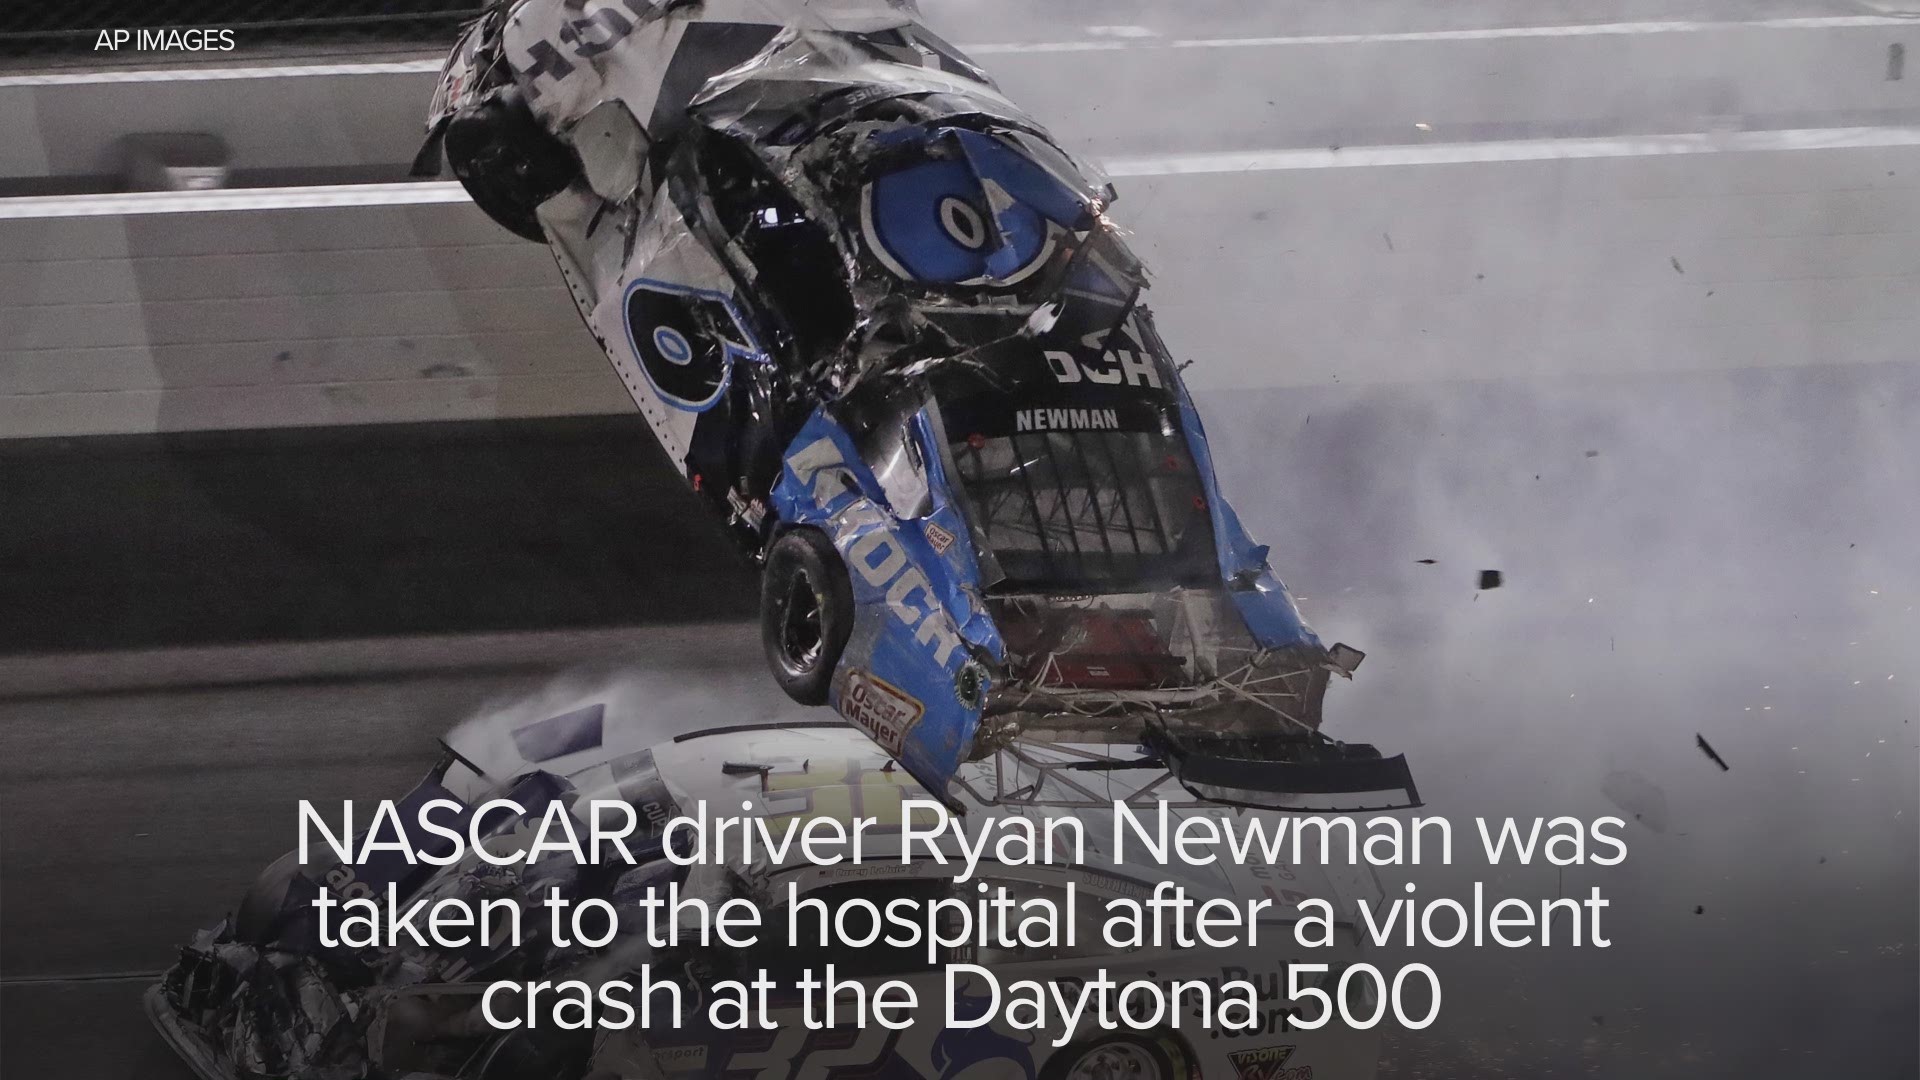 According to his team, Ryan Newman is in serious condition after a violent crash at the end of the Daytona 500.